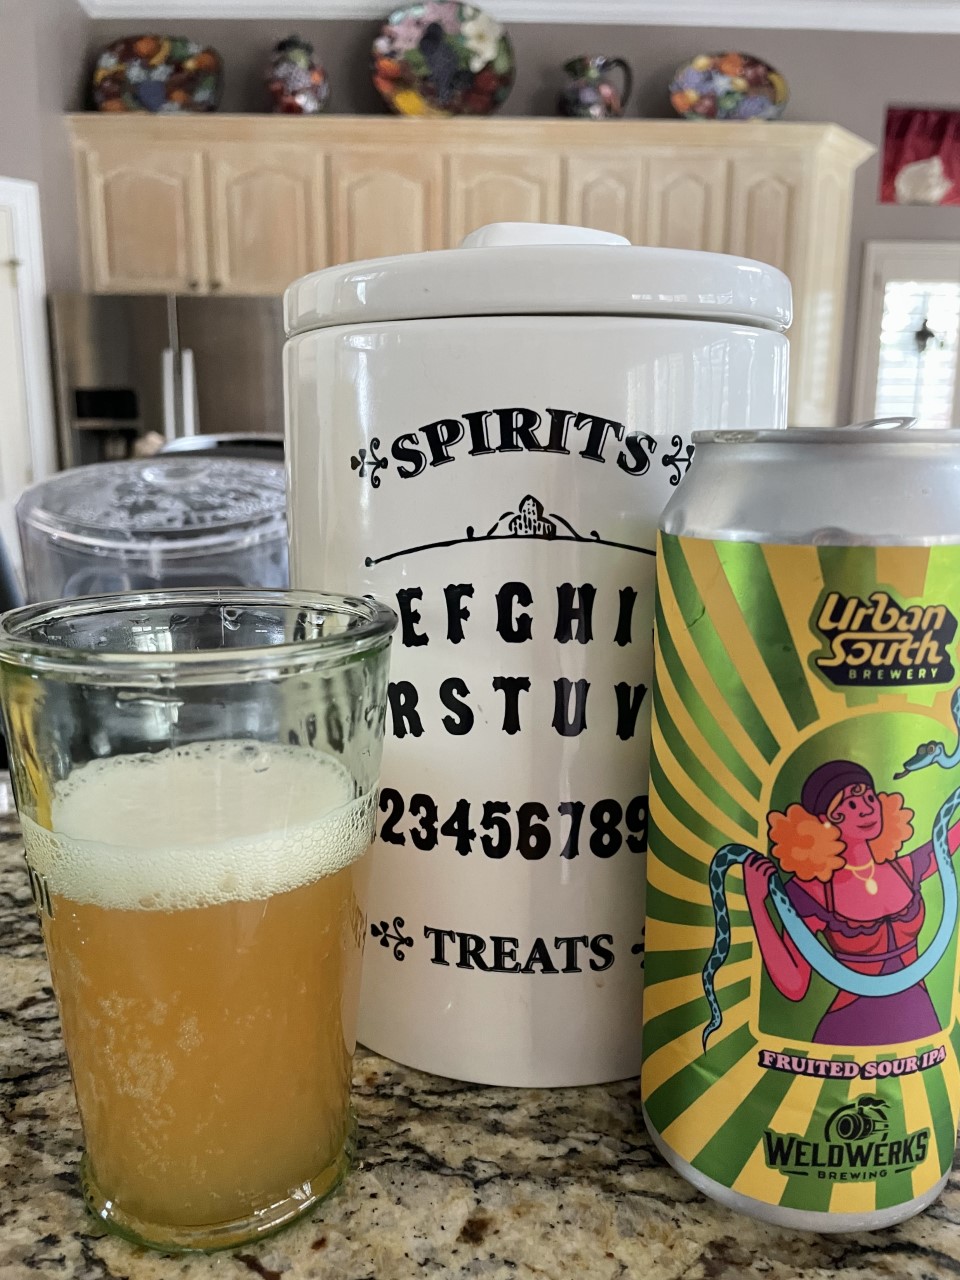 Urban South HTX & WeldWorks Snake Charmer Fruited Sour IPA